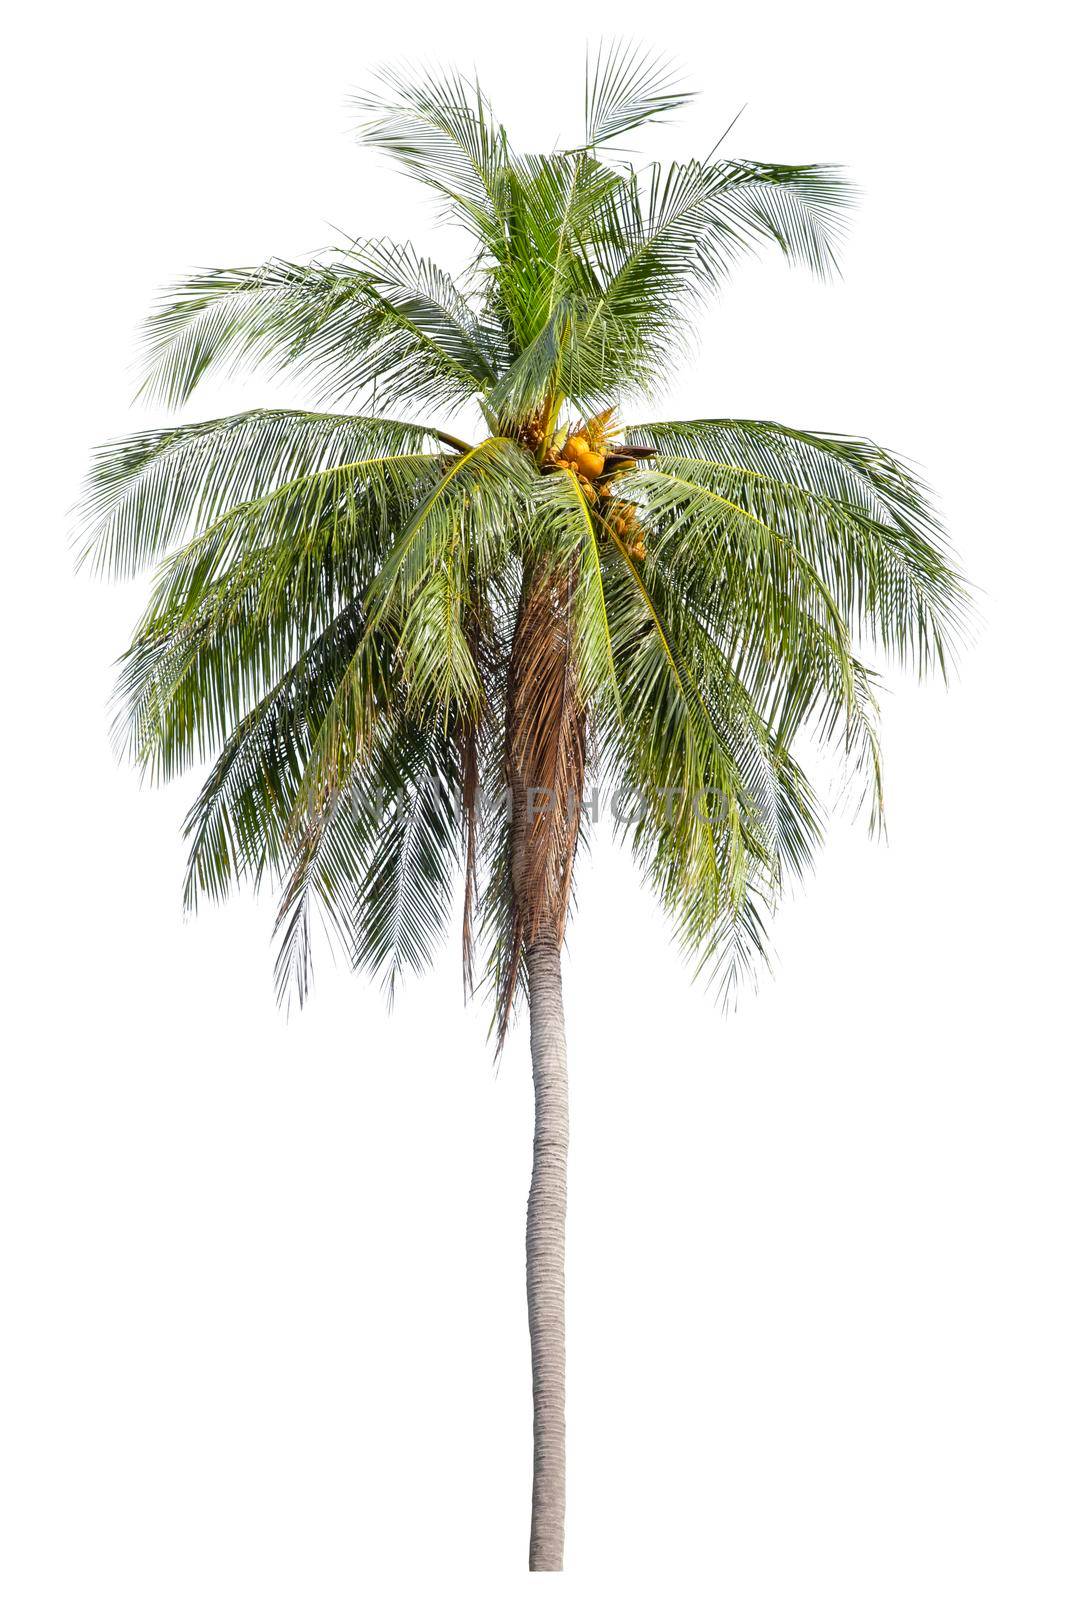 The coconut tree isolated on white background.